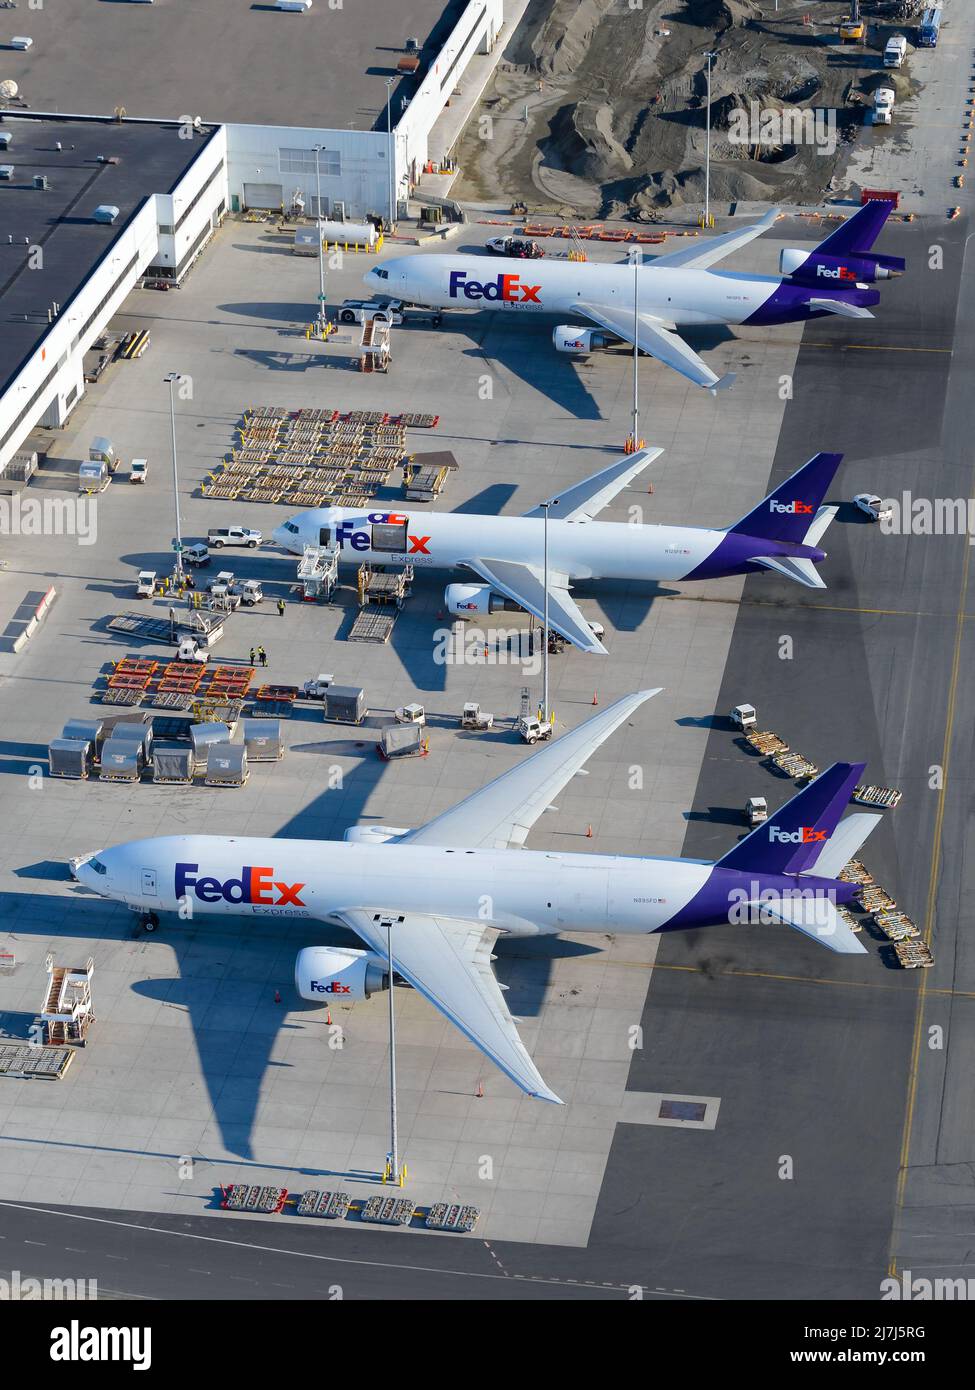 Airplane of FedEx Cargo at Anchorage Airport, a hub for freight transportation for Federal Express. Line up of freighter aircraft. Stock Photo